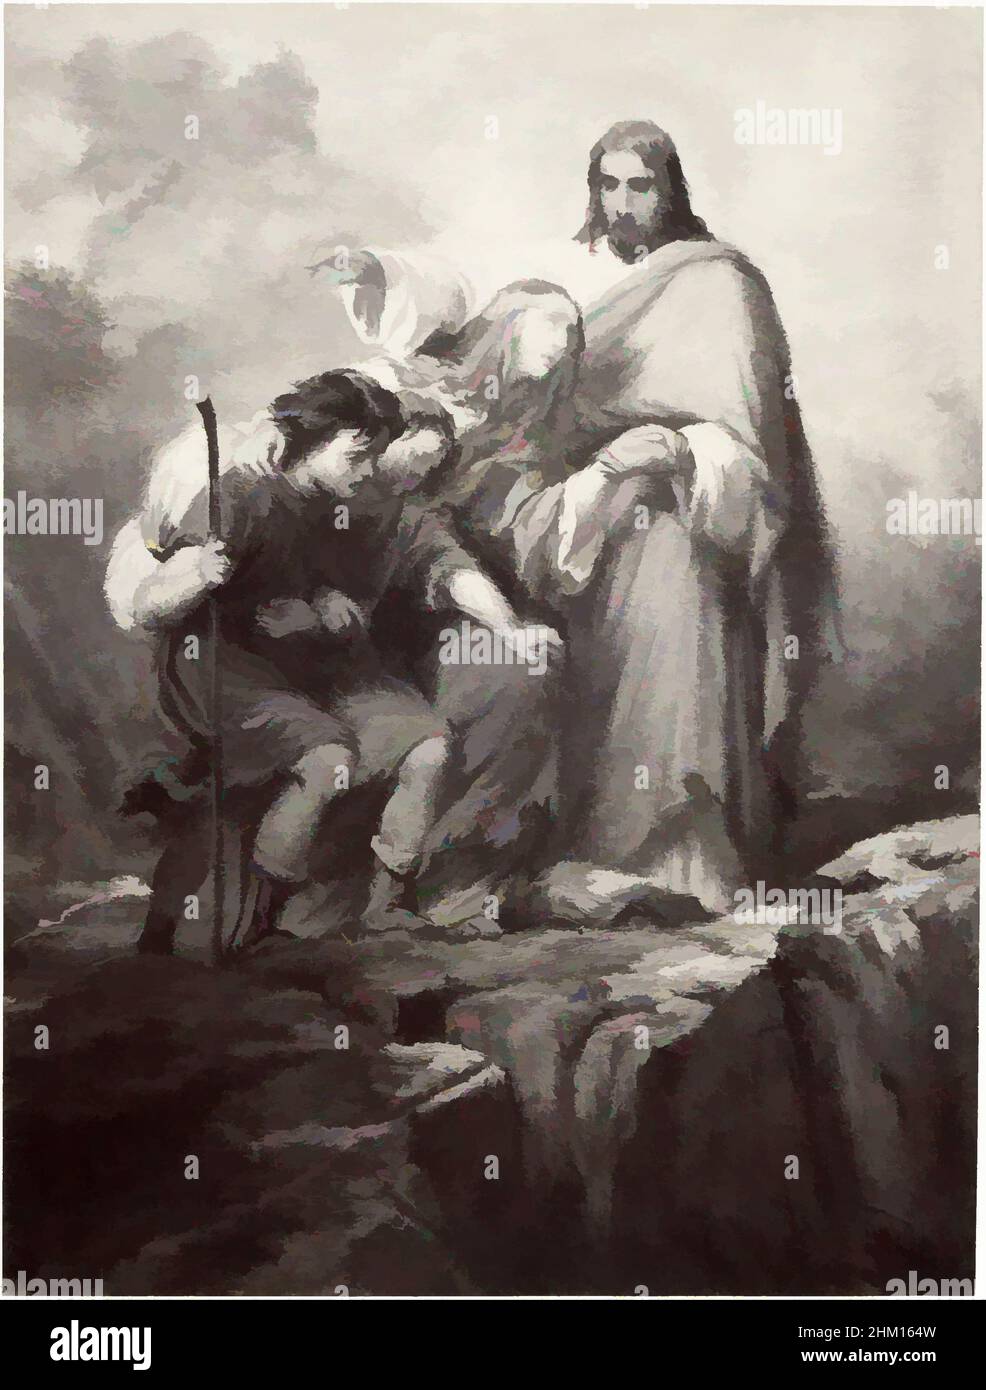 Art inspired by Photoreproduction of a painting of Christ supporting the poor by Paul Delaroche, Le Christ, espoir et soutien des affligés, Robert Jefferson Bingham, after: Paul Delaroche, Paris, c. 1853 - in or before 1858, paper, albumen print, engraving, height 132 mm × width 100, Classic works modernized by Artotop with a splash of modernity. Shapes, color and value, eye-catching visual impact on art. Emotions through freedom of artworks in a contemporary way. A timeless message pursuing a wildly creative new direction. Artists turning to the digital medium and creating the Artotop NFT Stock Photo